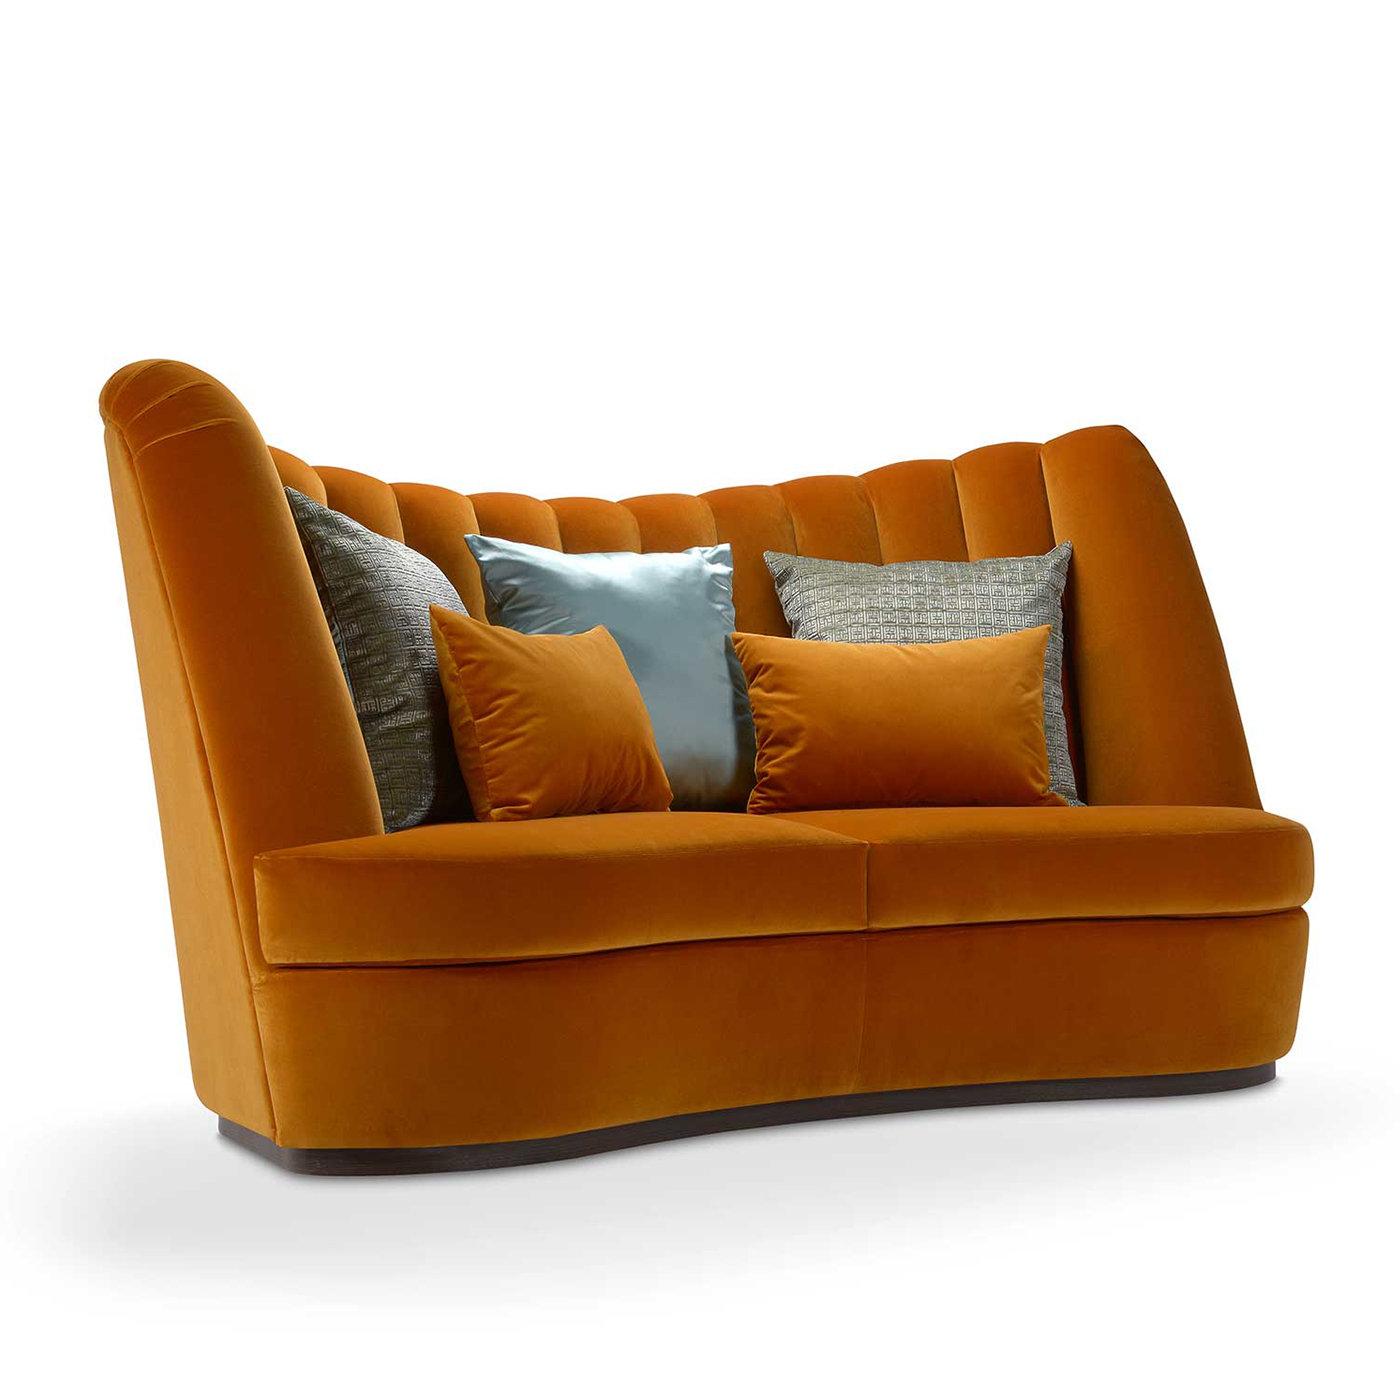 This handcrafted, three-seater sofa, stands out for its imposing, fluted backrest fully embracing the curved seat. A rich padding complements the sturdy wooden frame that includes a thin laminate base with a harmonious wenge-like finish. The